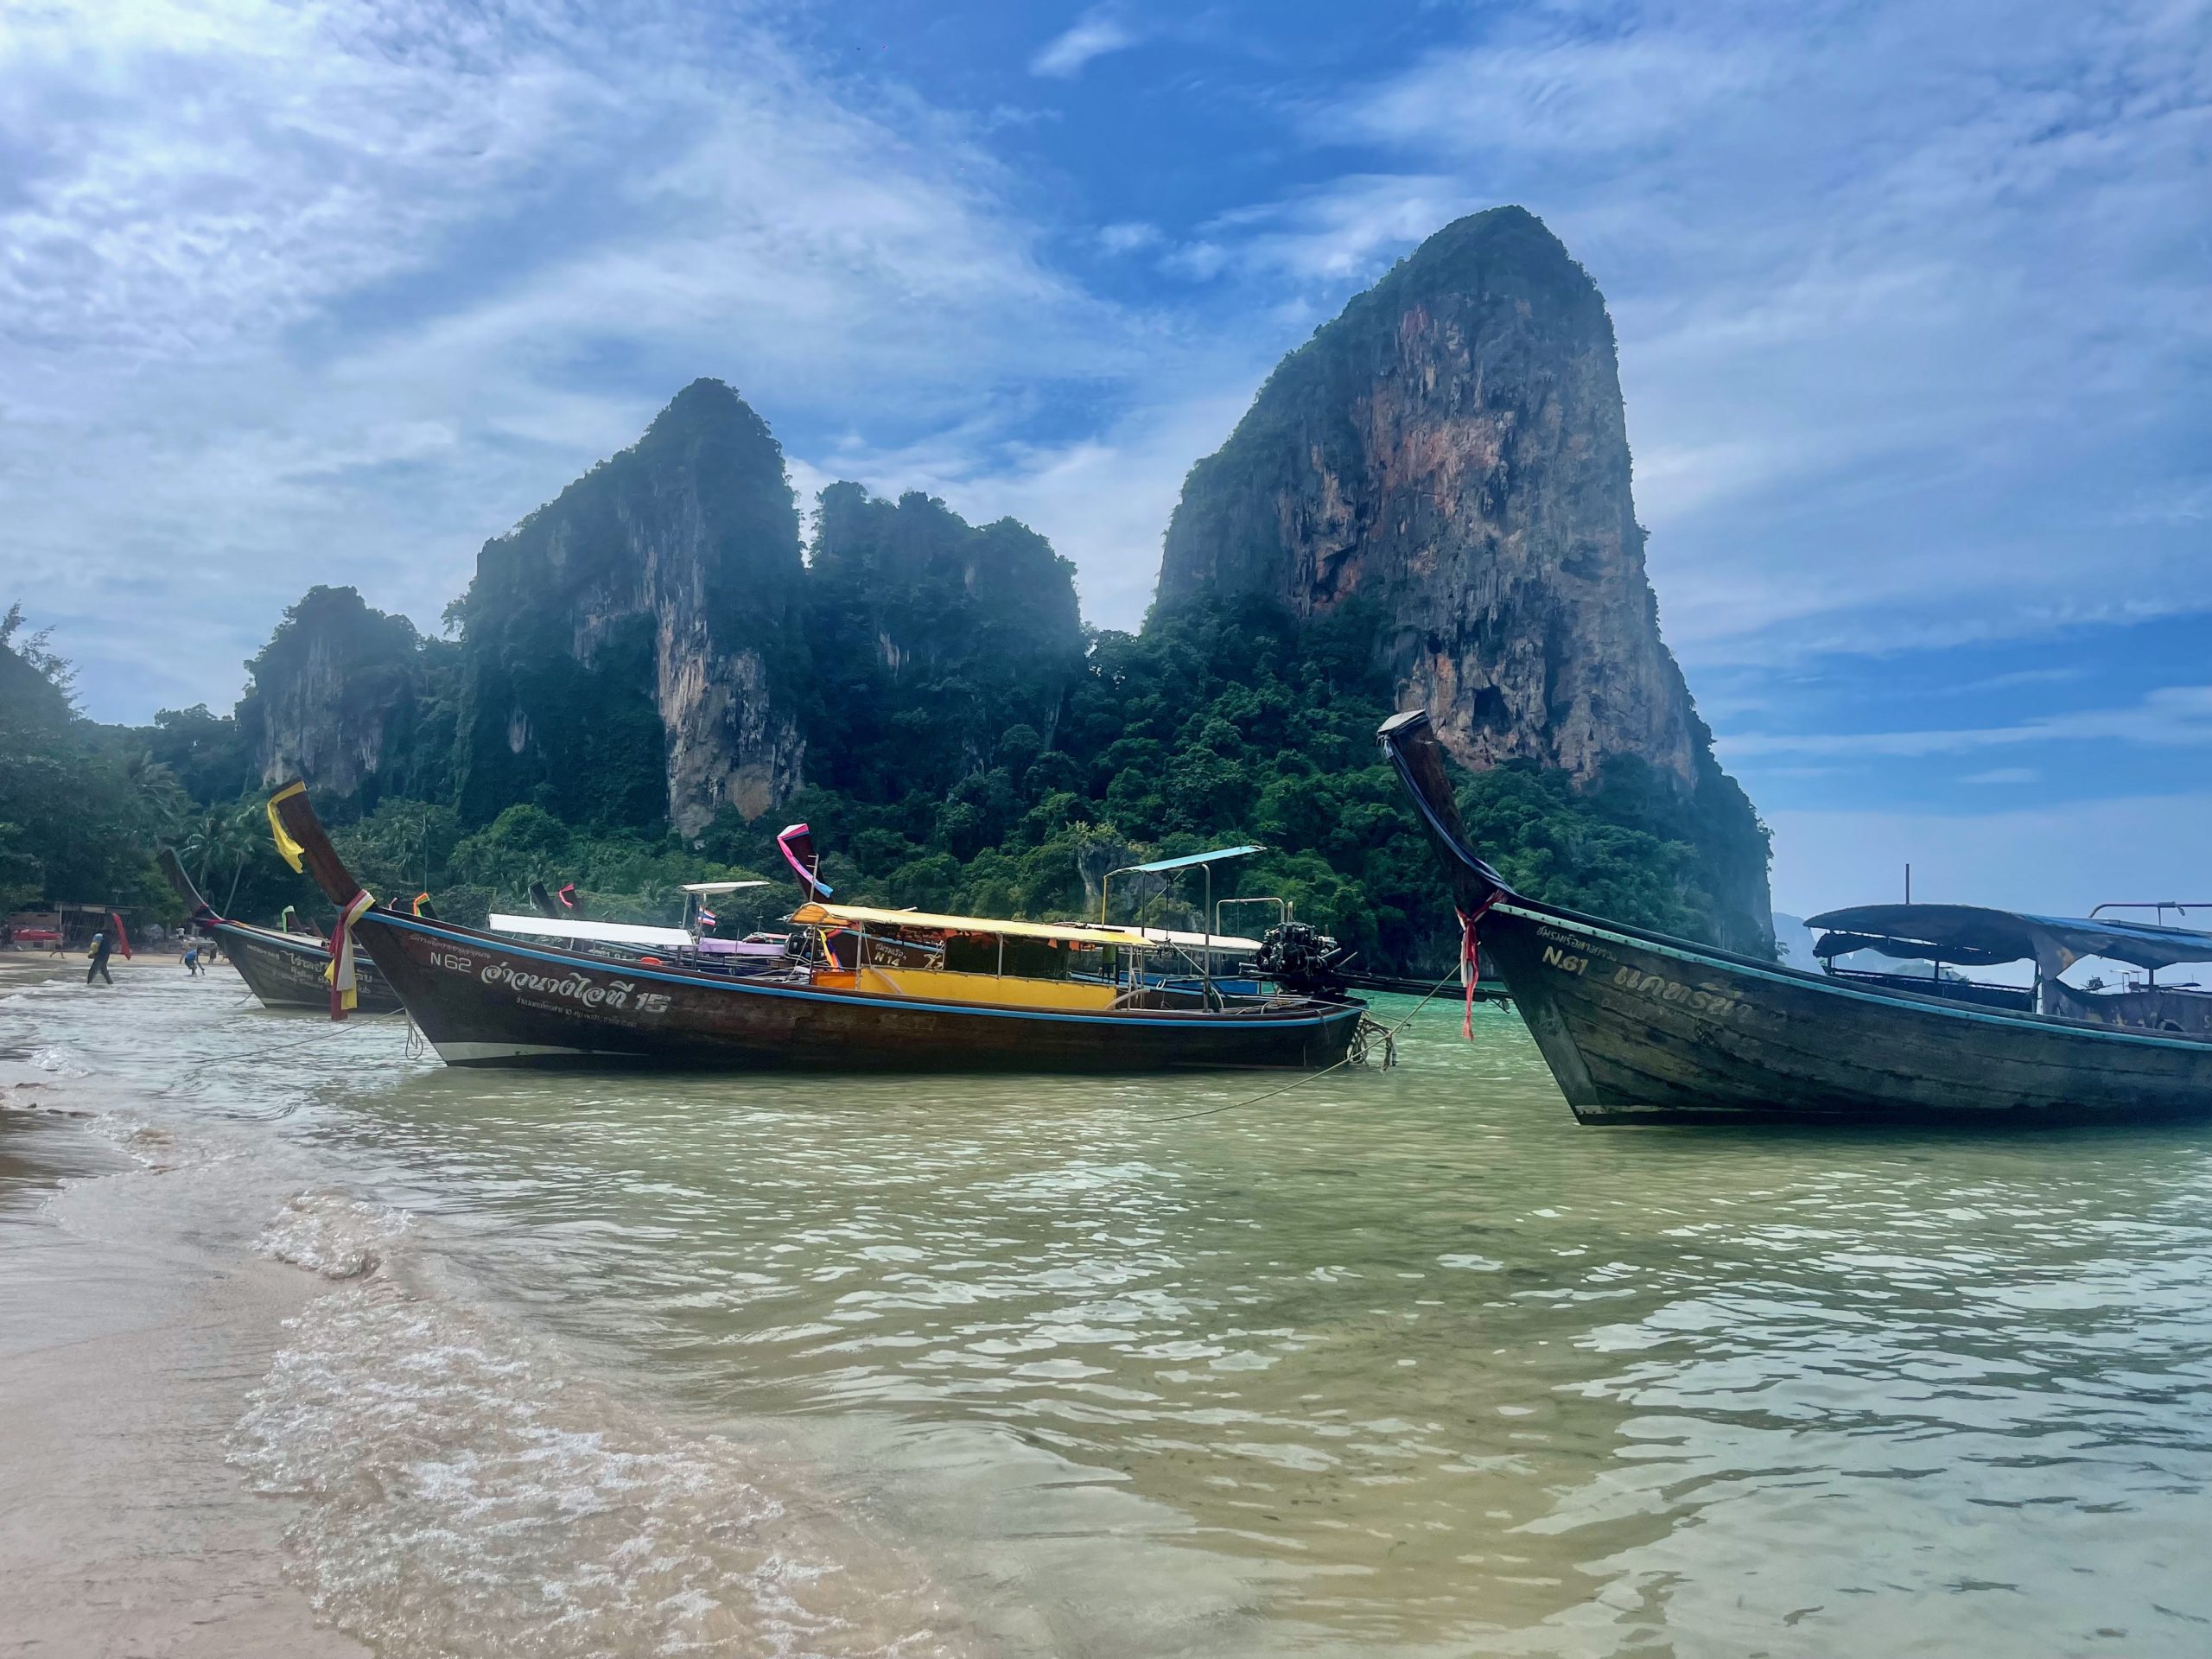 Longtail boats on Krabi's famous Railay Beach with limestone cliffs in the background